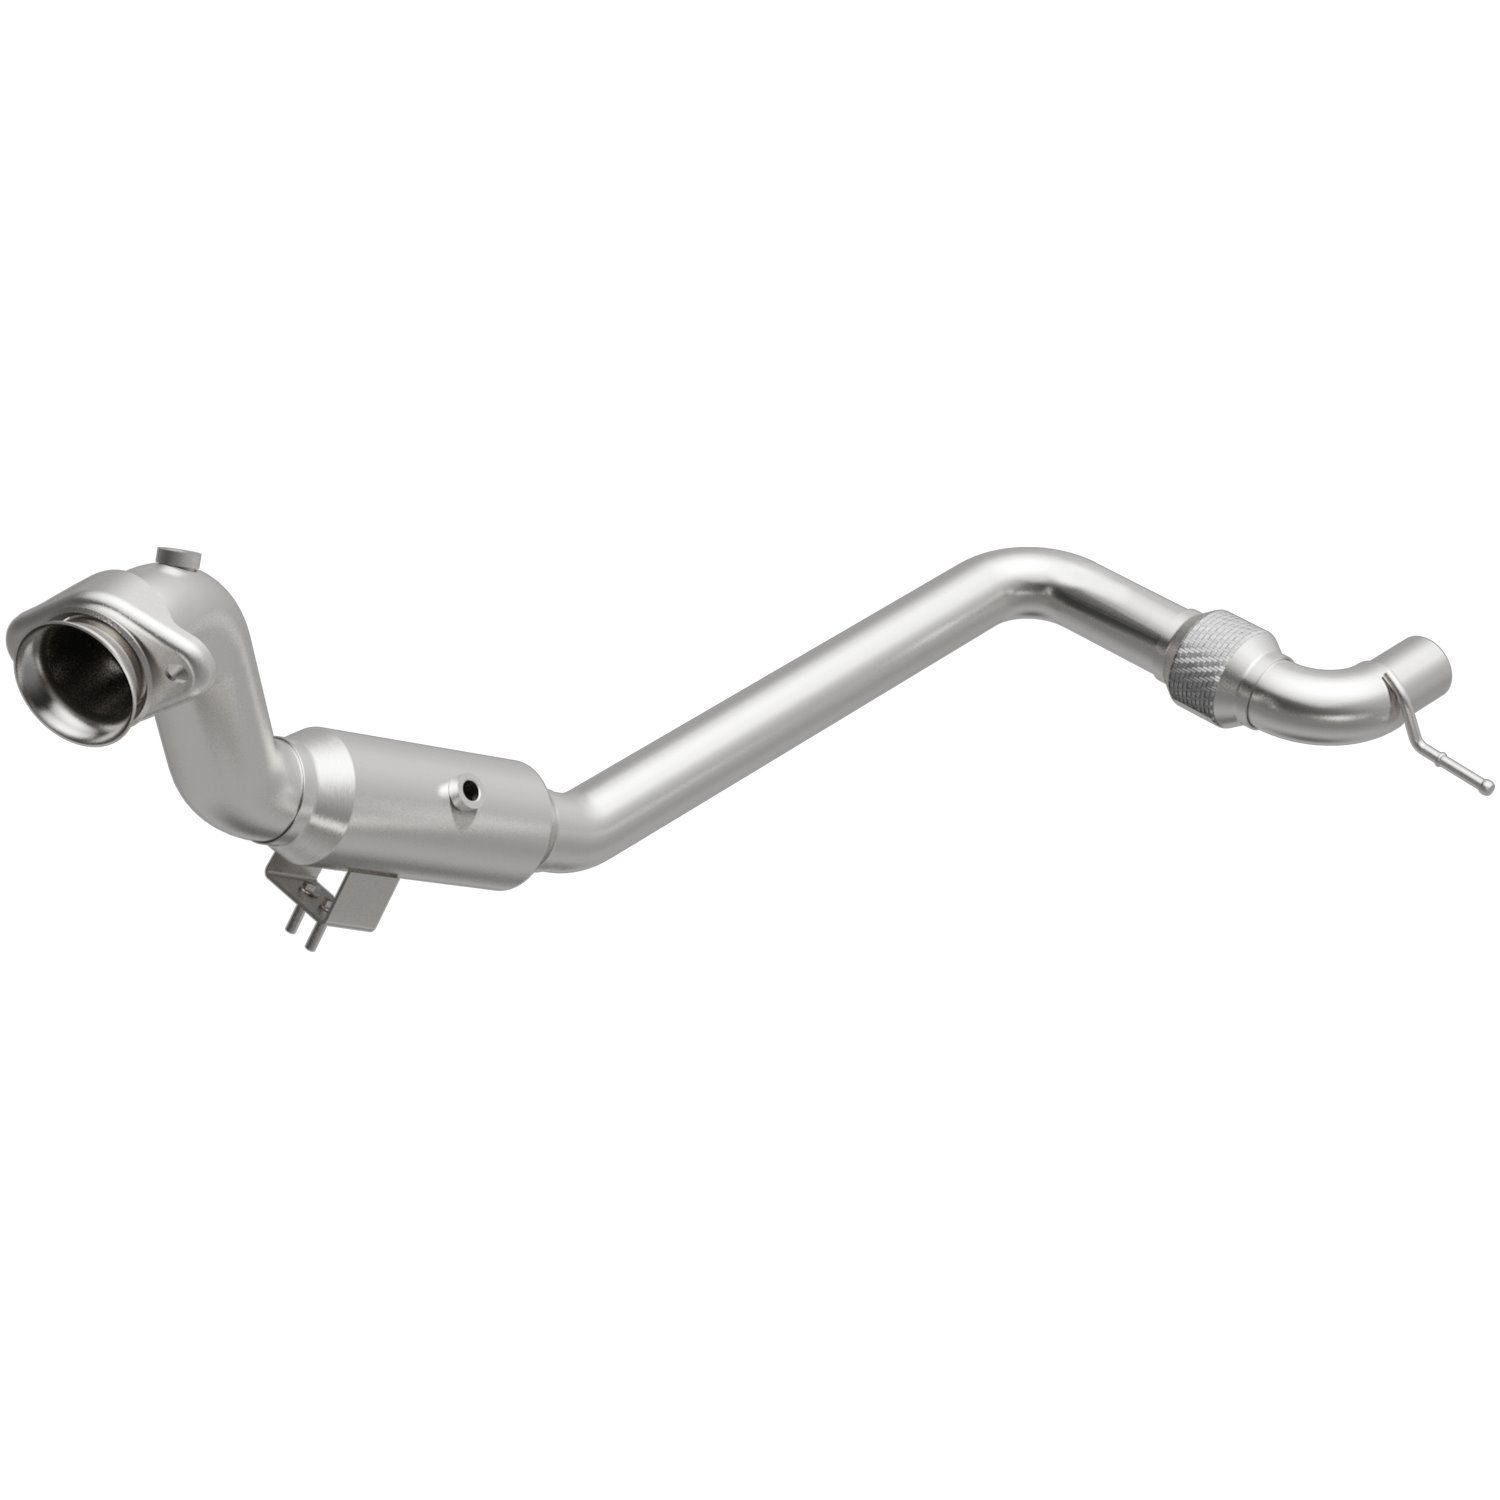 2015-2020 Ford Mustang OEM Grade Federal / EPA Compliant Direct-Fit Catalytic Converter